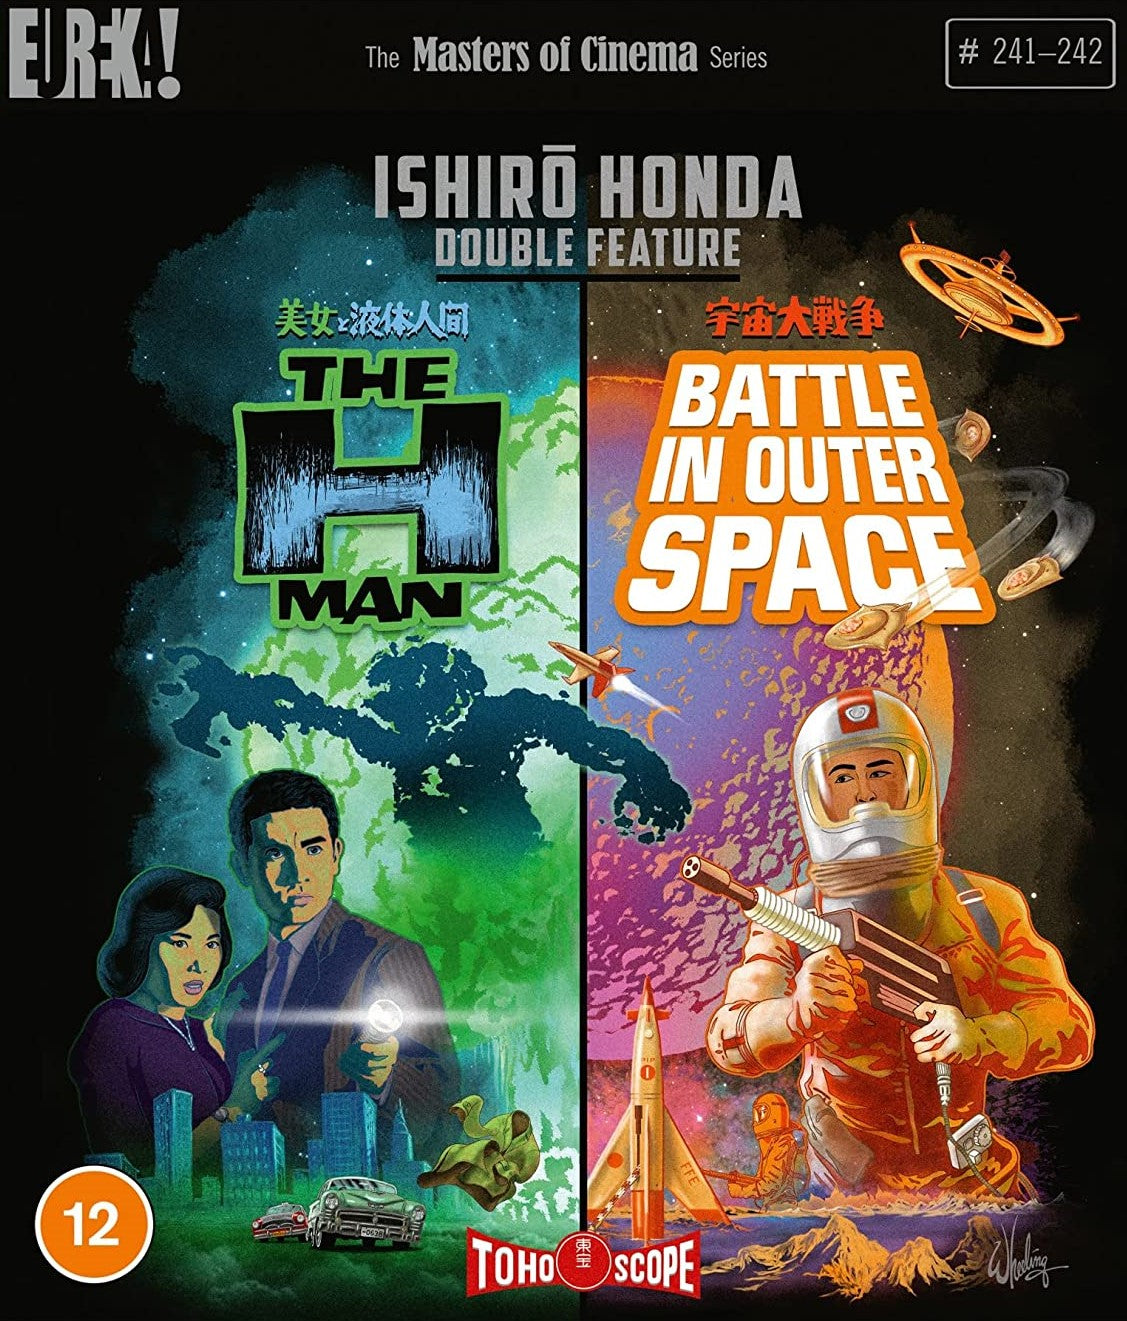 THE H MAN / BATTLE IN OUTER SPACE (REGION B IMPORT) BLU-RAY